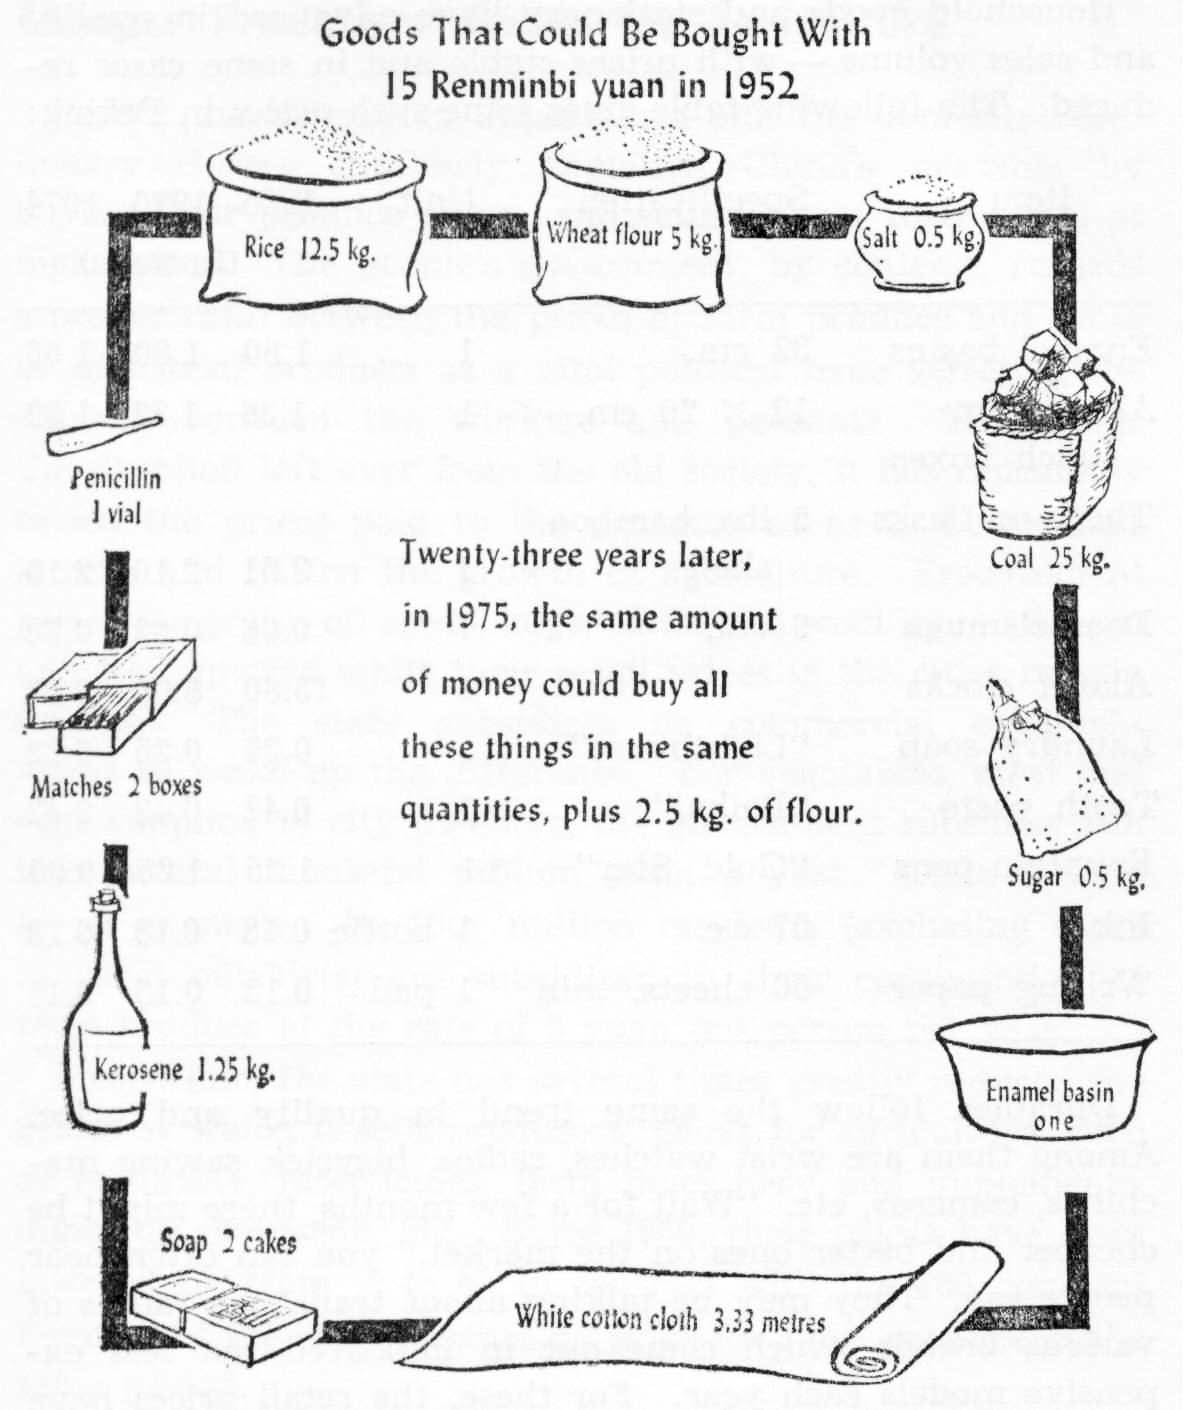 File:Goods That Could Be Bought With 15 Renminbi yuan in 1952.jpg